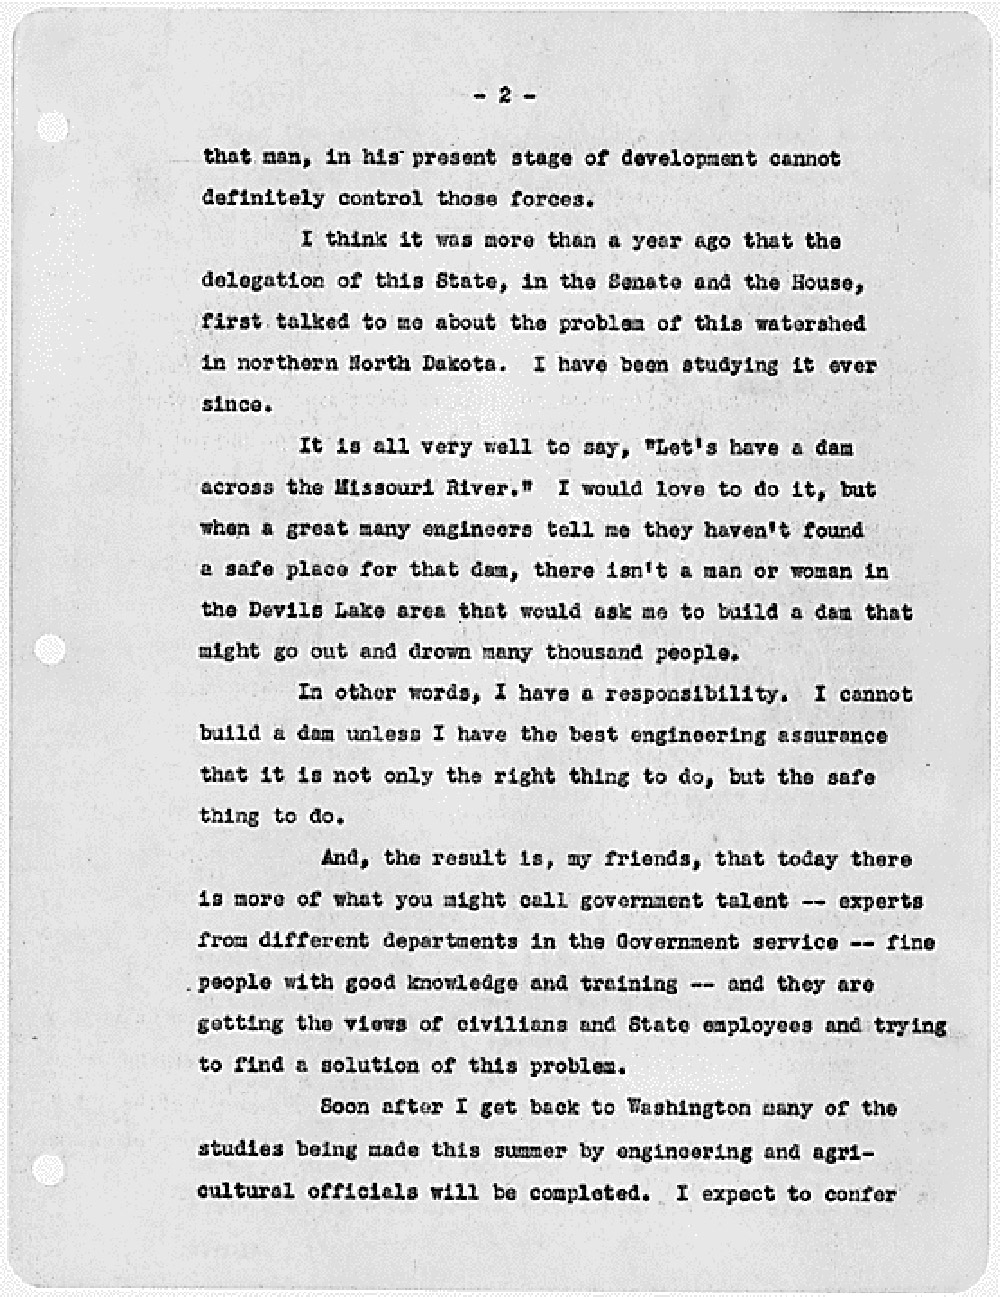 President Roosevelt made several trips to North Dakota during the Great Depression. In this speech to people at Devils Lake, he offered no solutions to the problems of drought and depression. He tells them that it is not likely that the federal government will build a dam on the Missouri River to provide irrigation waters. However, Roosevelt offered comfort and understanding.